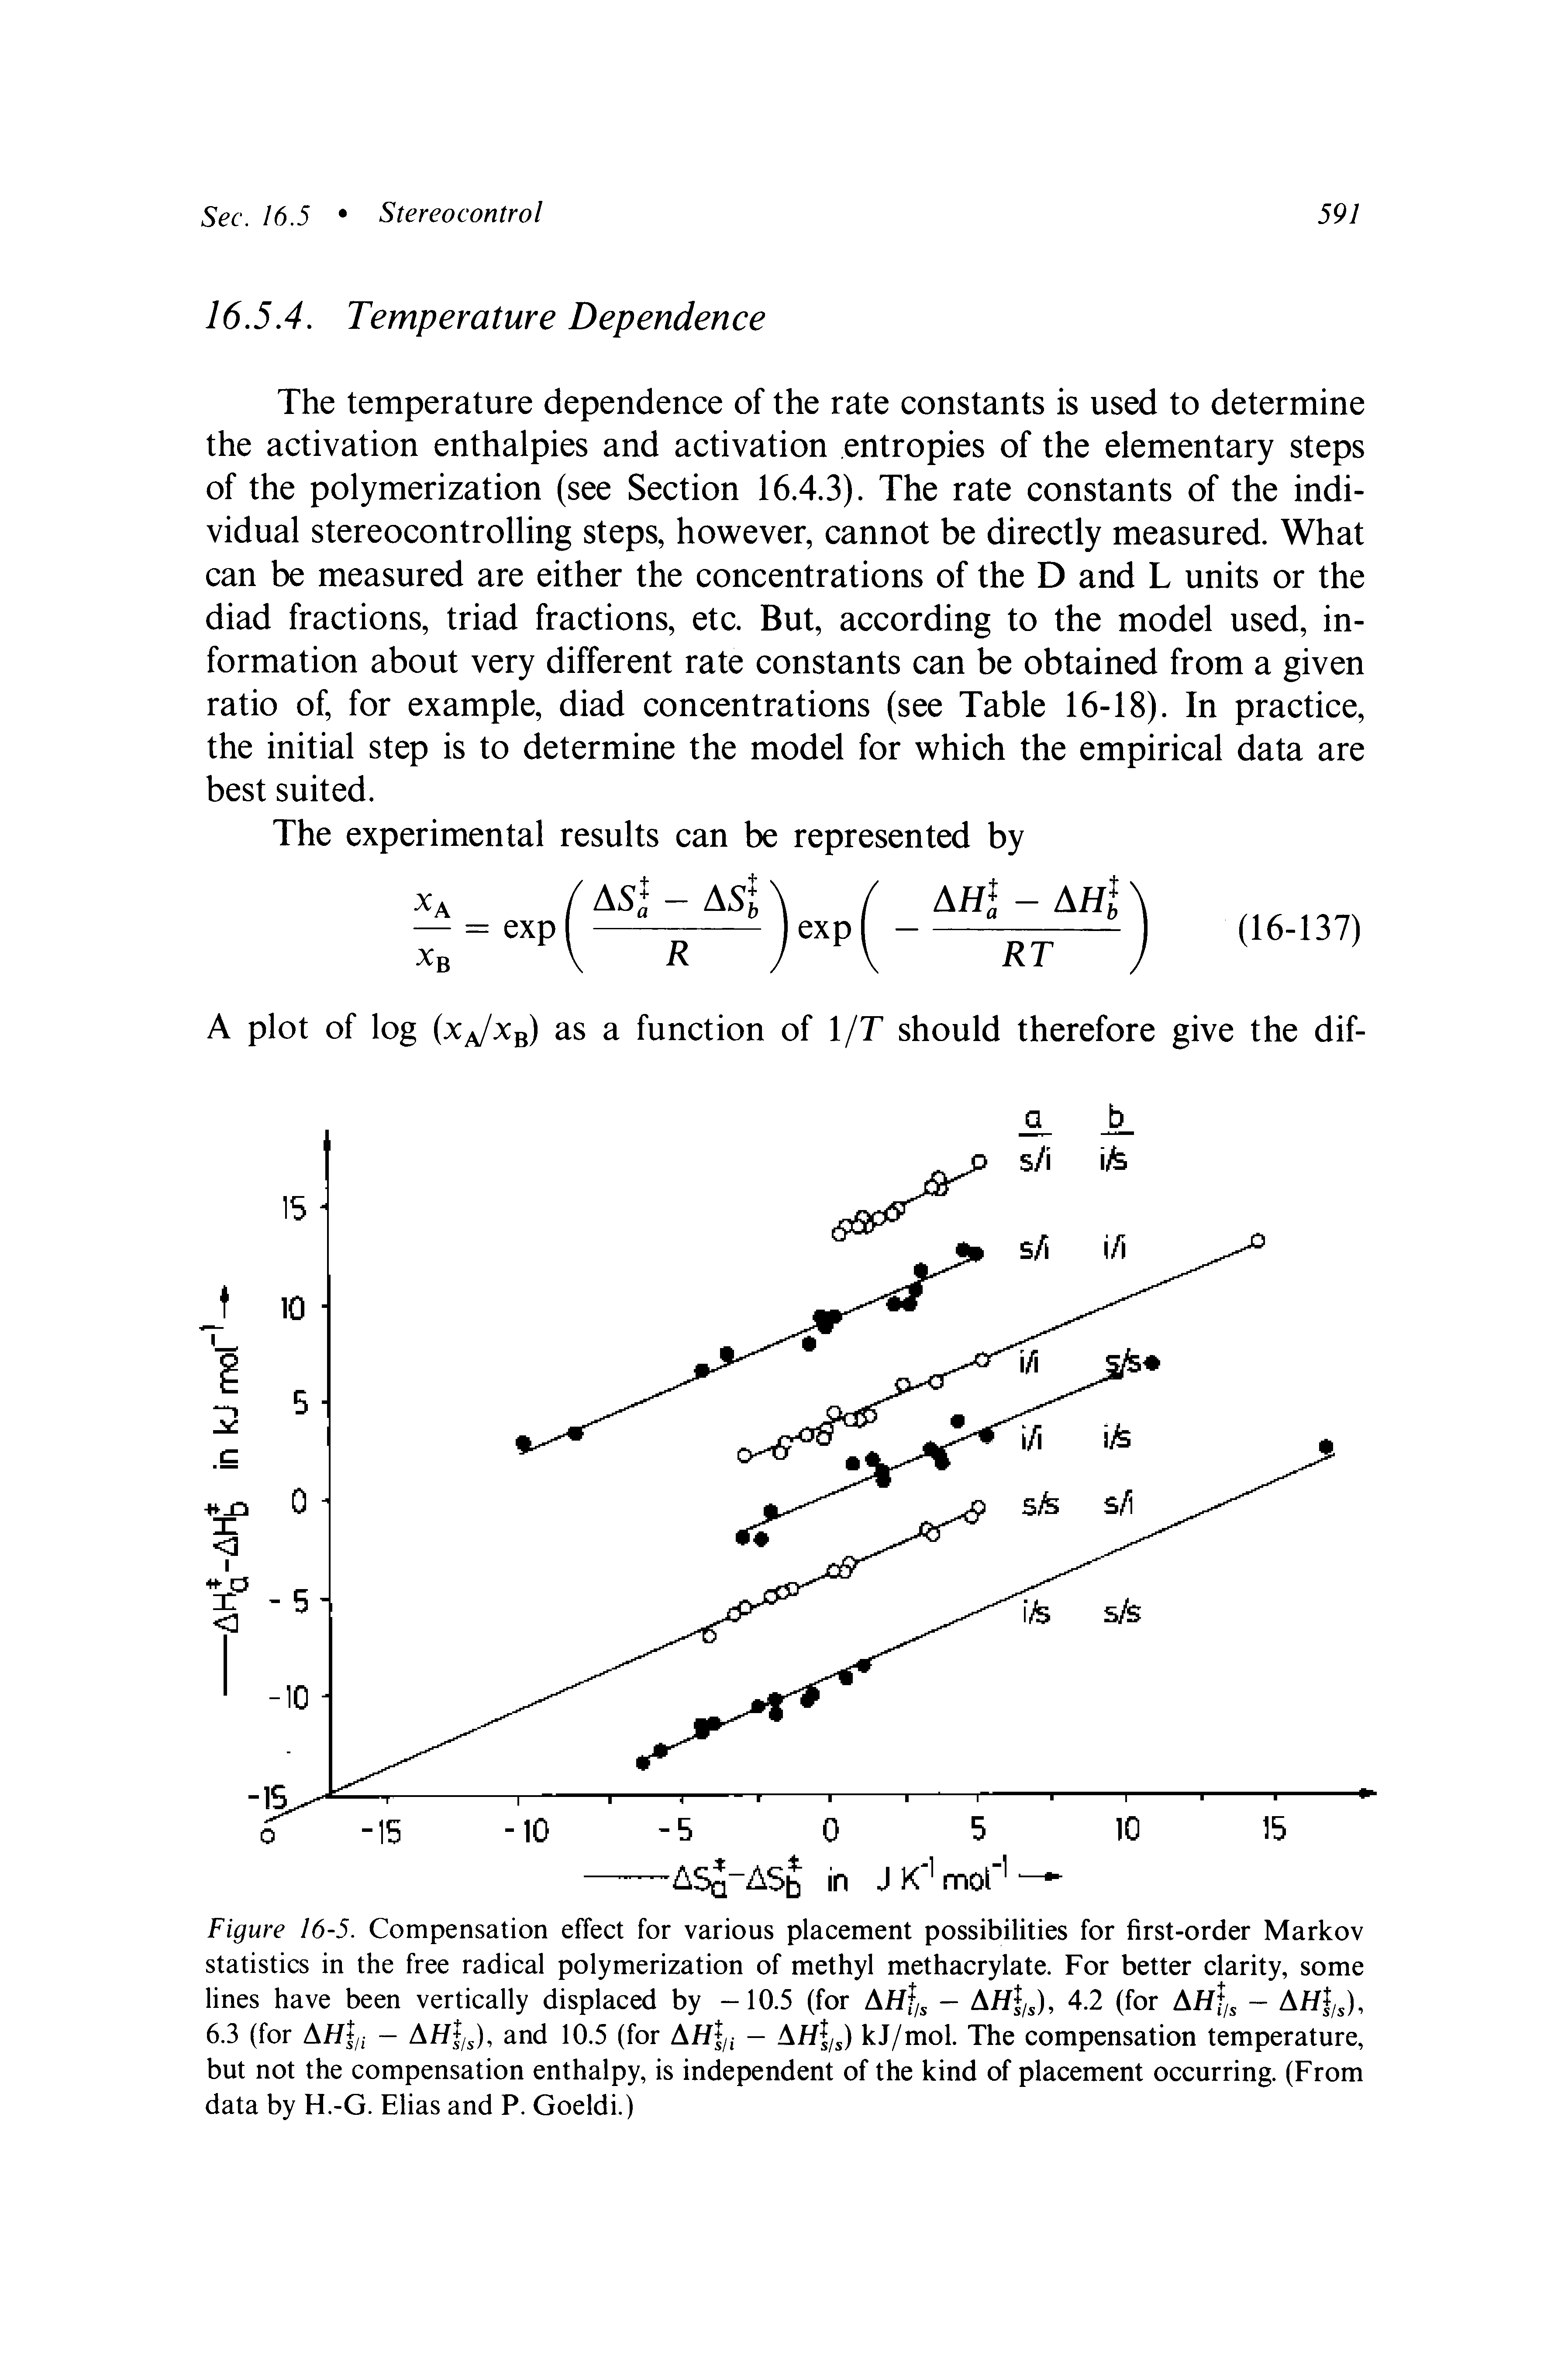 Figure 16-5. Compensation effect for various placement possibilities for first-order Markov statistics in the free radical polymerization of methyl methacrylate. For better clarity, some lines have been vertically displaced by -10.5 (for AHJs — 4.2 (for AhIs - Ar/ /J,...